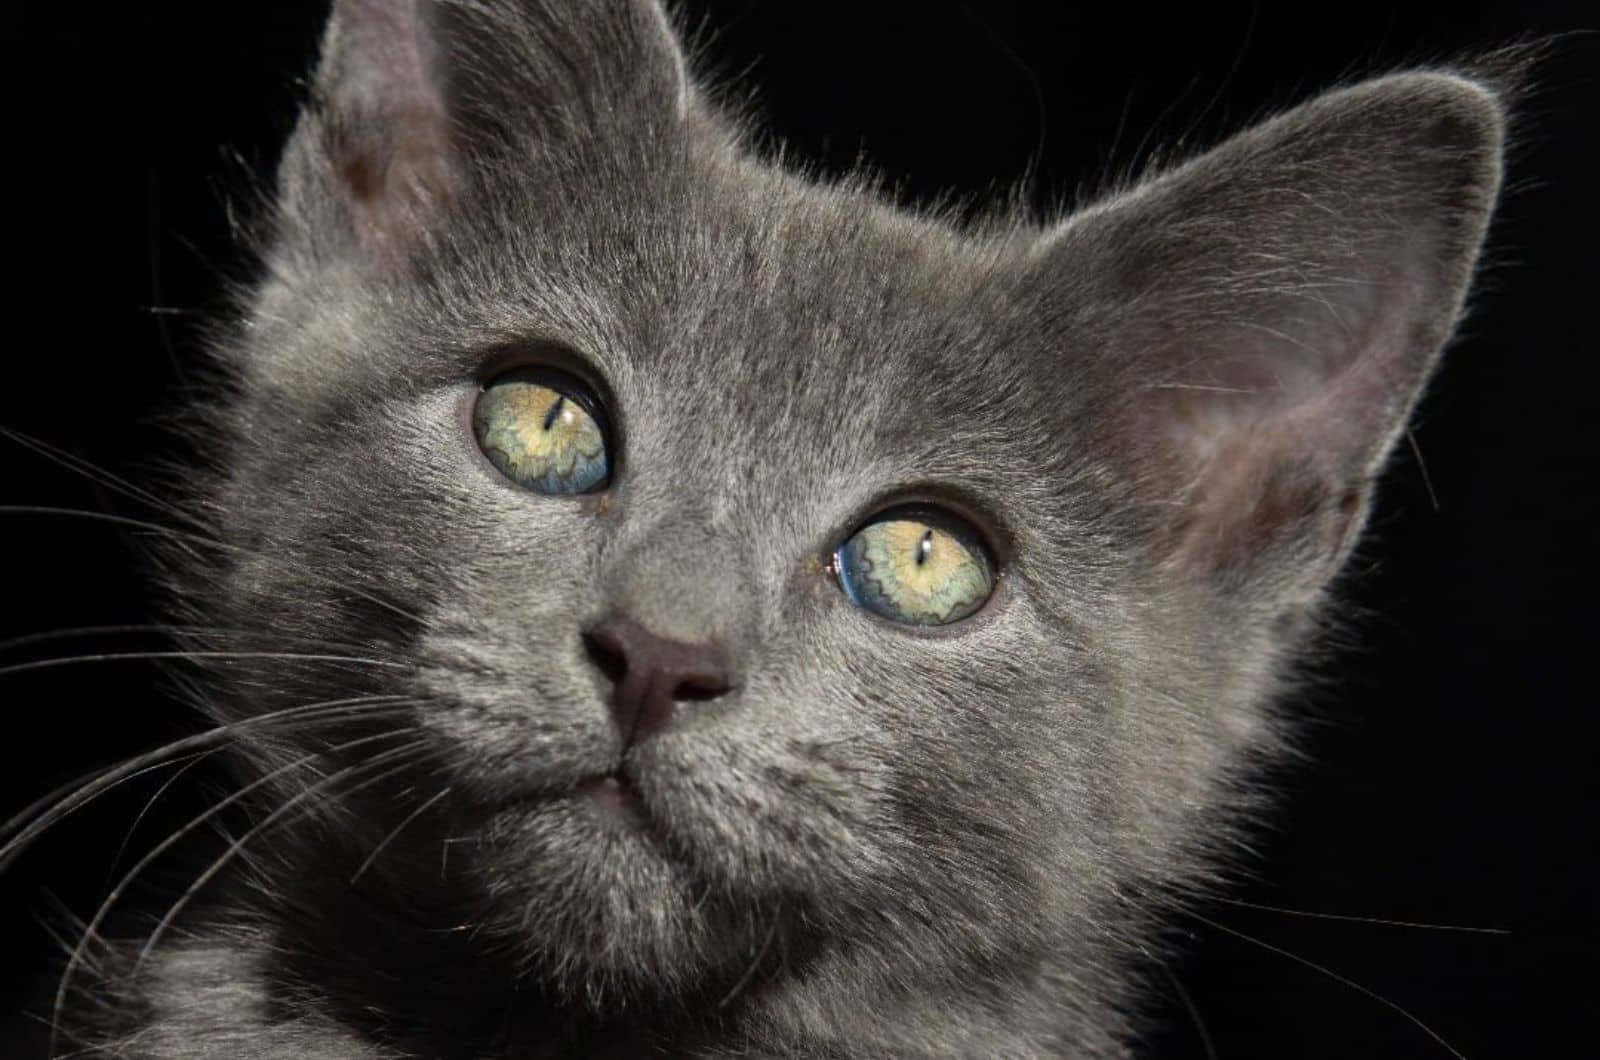 "A majestic Russian Blue Cat stares graciously"